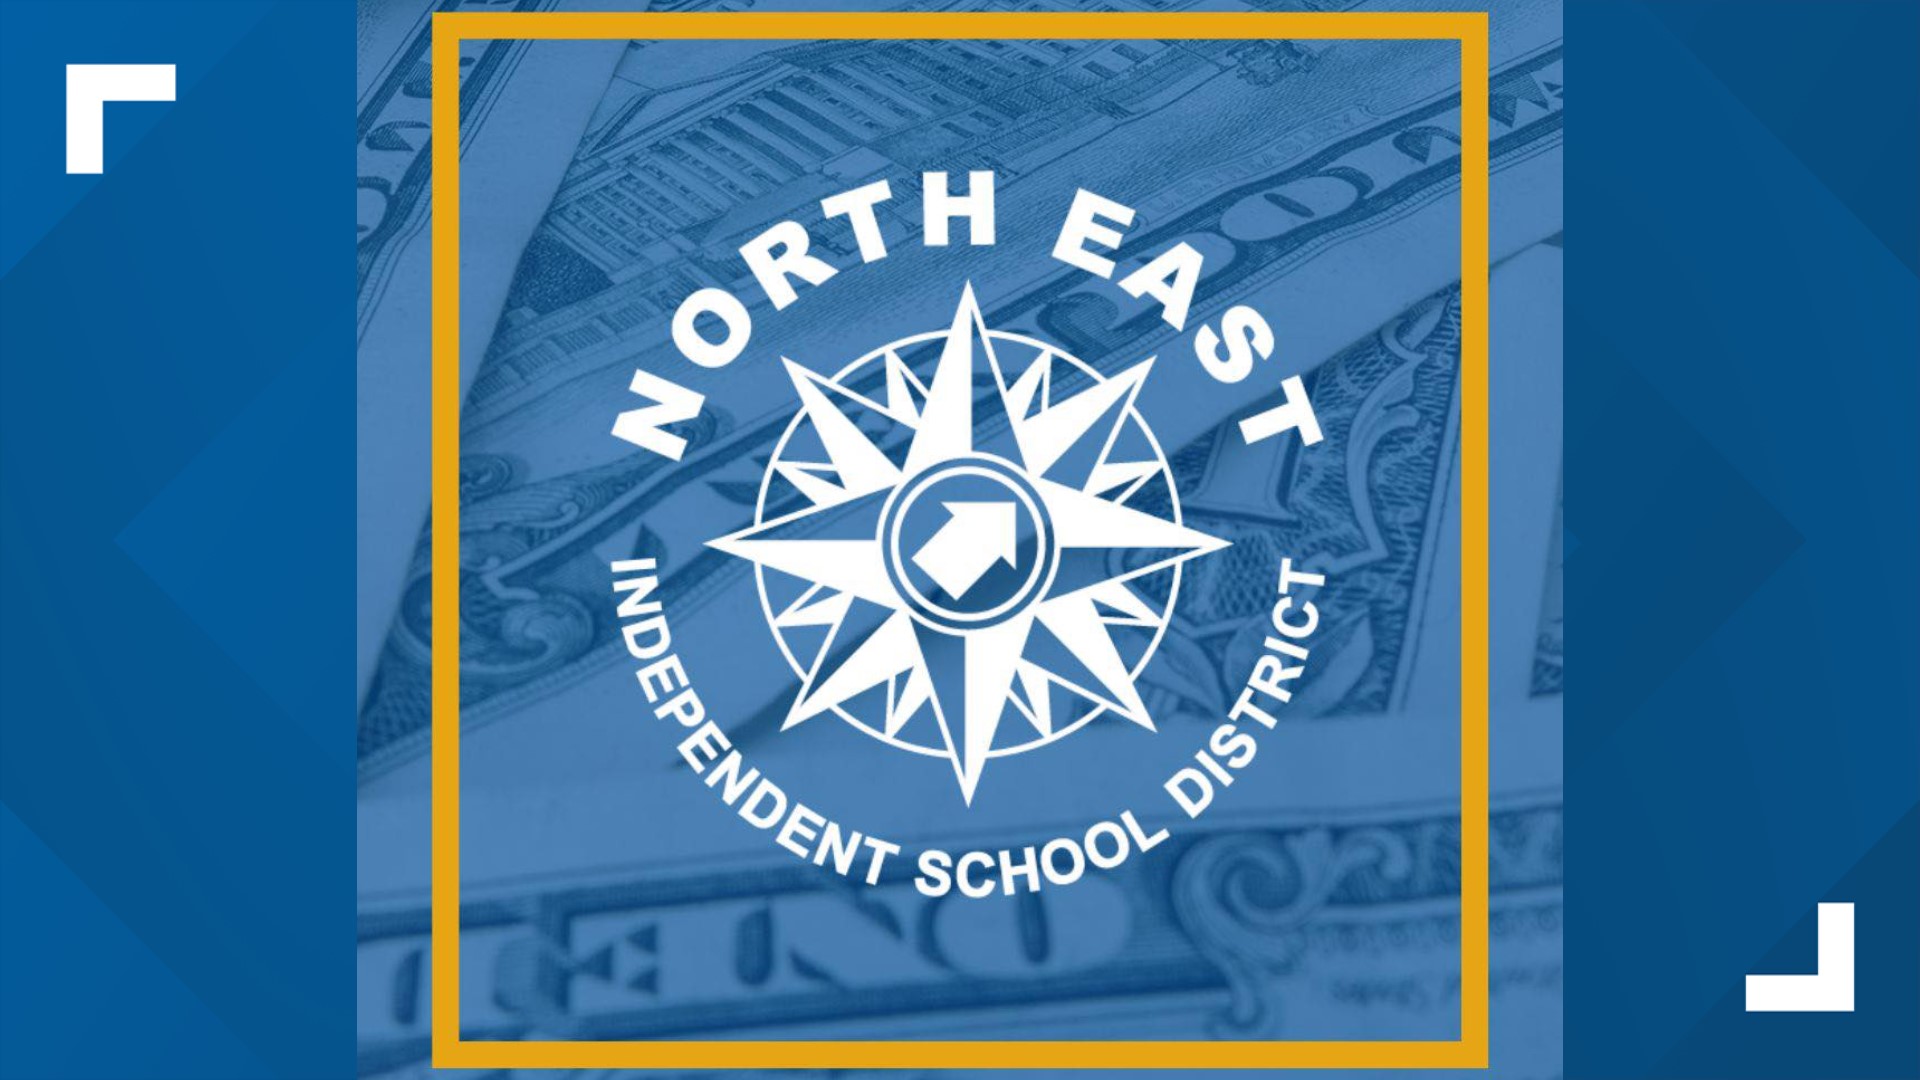 North East ISD announces largest raise in 20 years